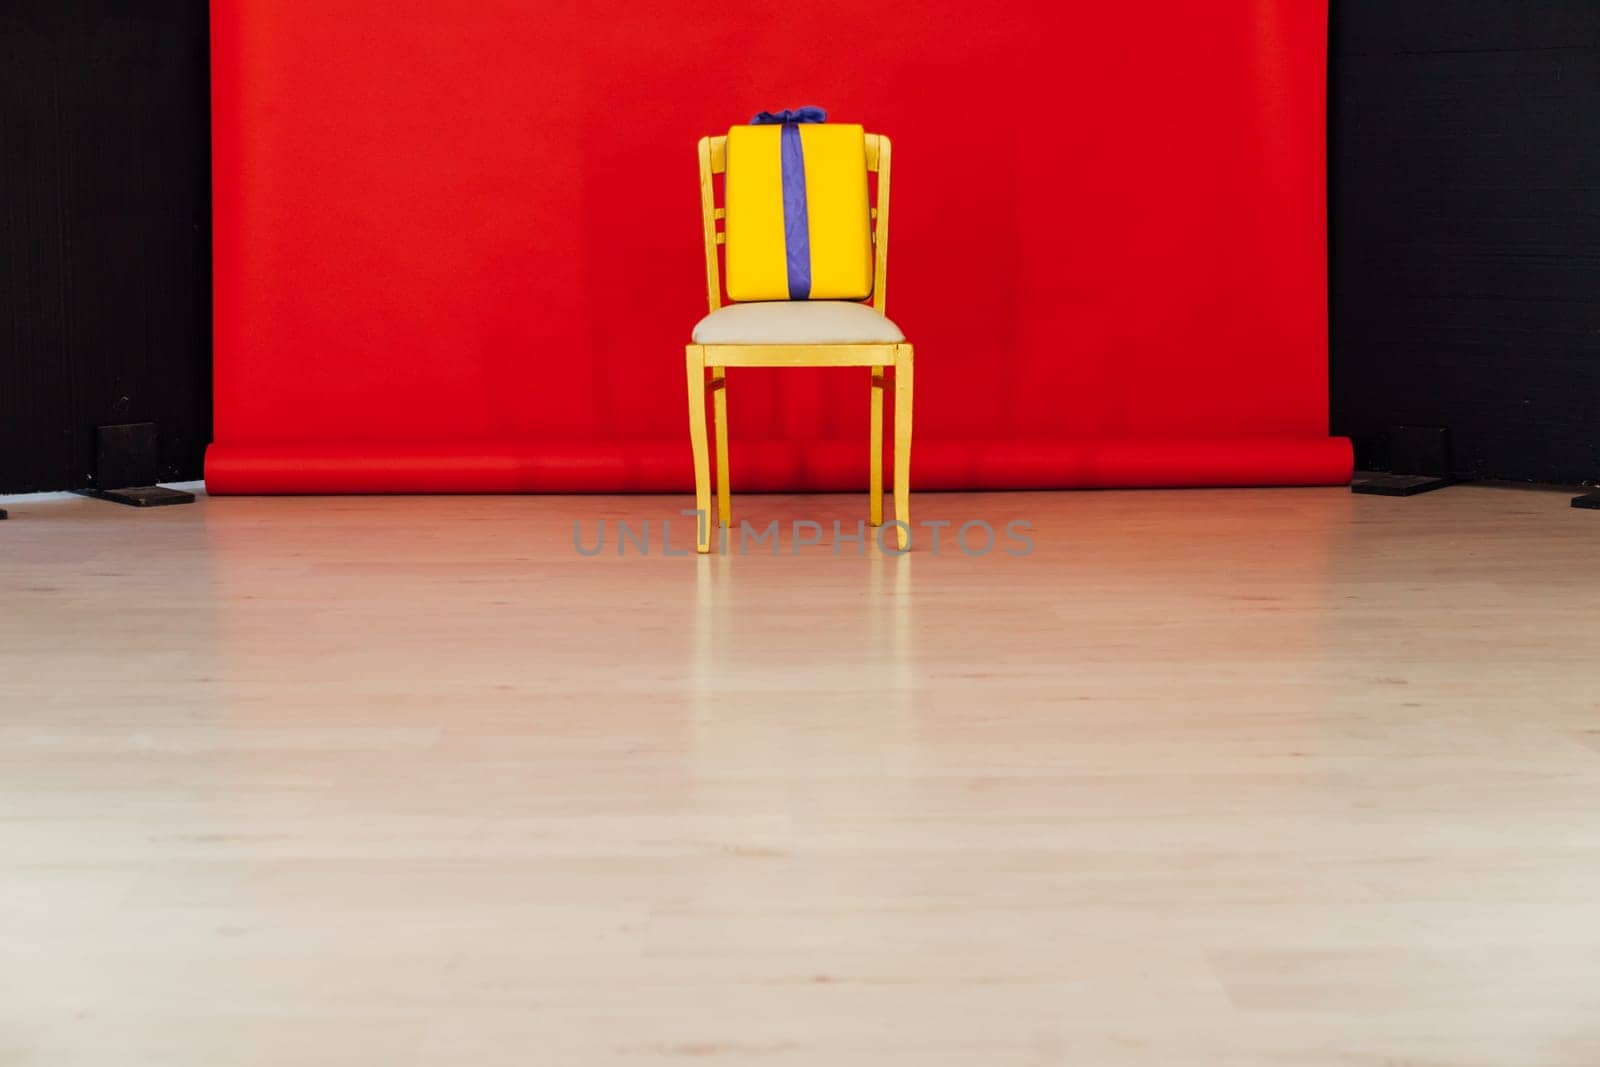 red black background room golden chair